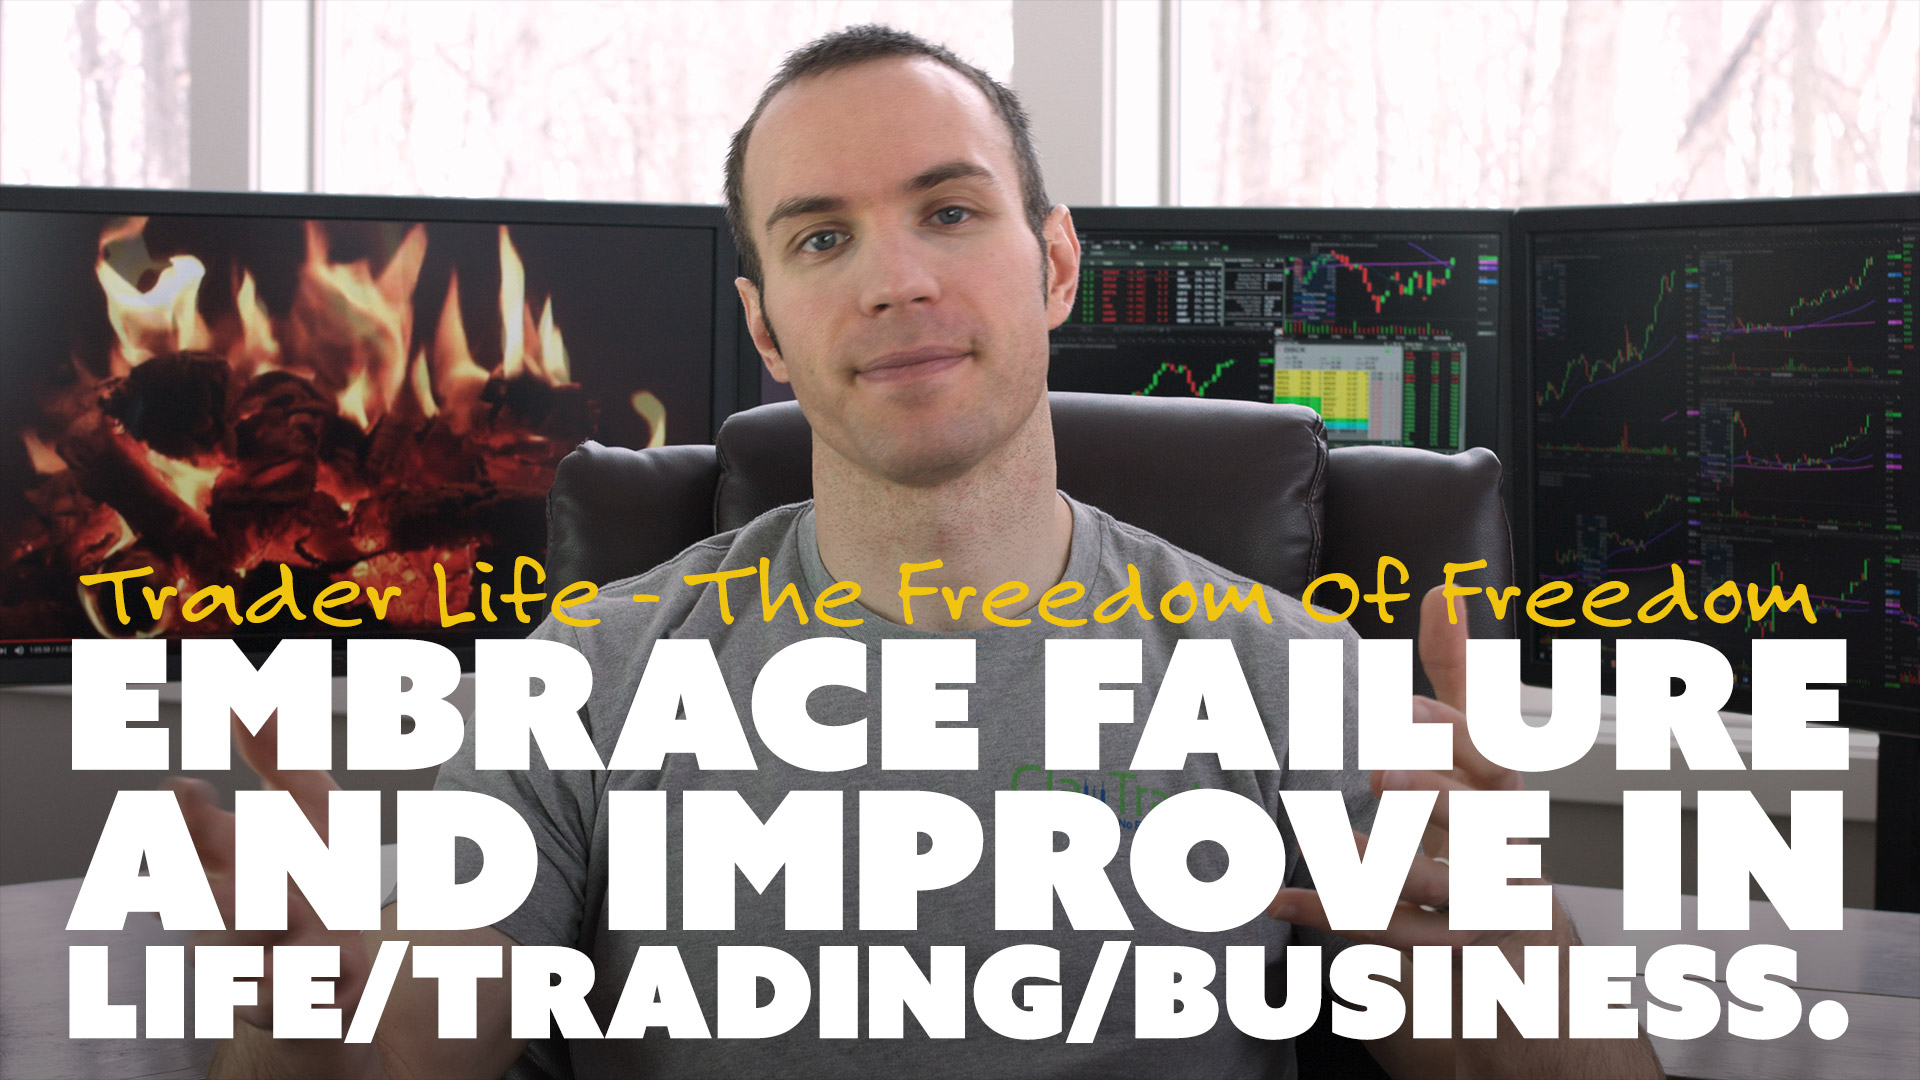 Embrace Failure and Improve in Life/Trading/Business.